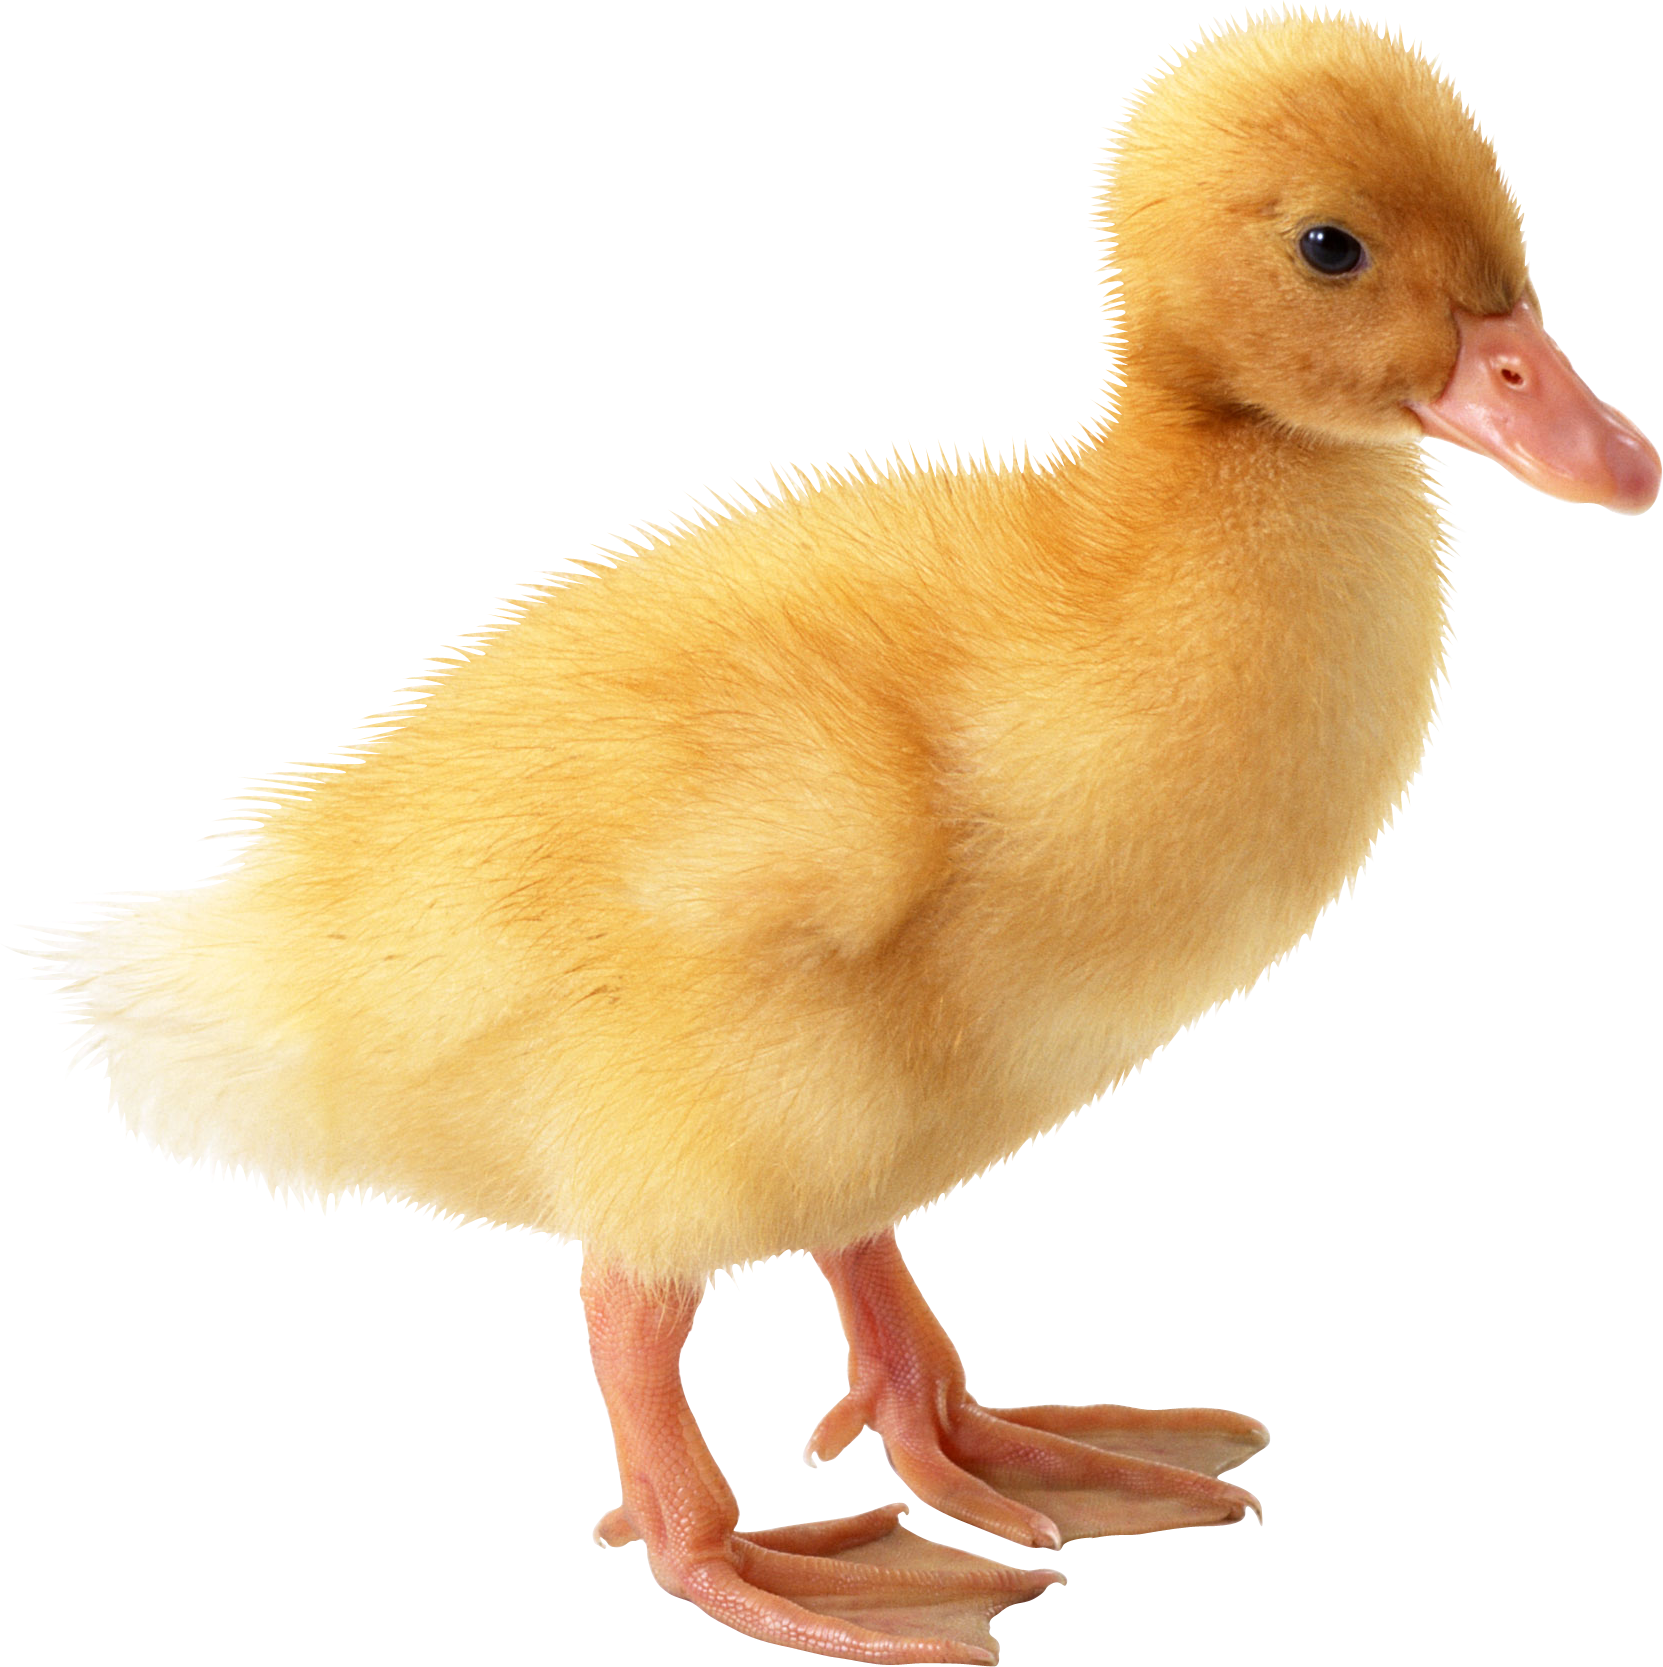 Little Yellow Duck Png Image - Duck, Transparent background PNG HD thumbnail